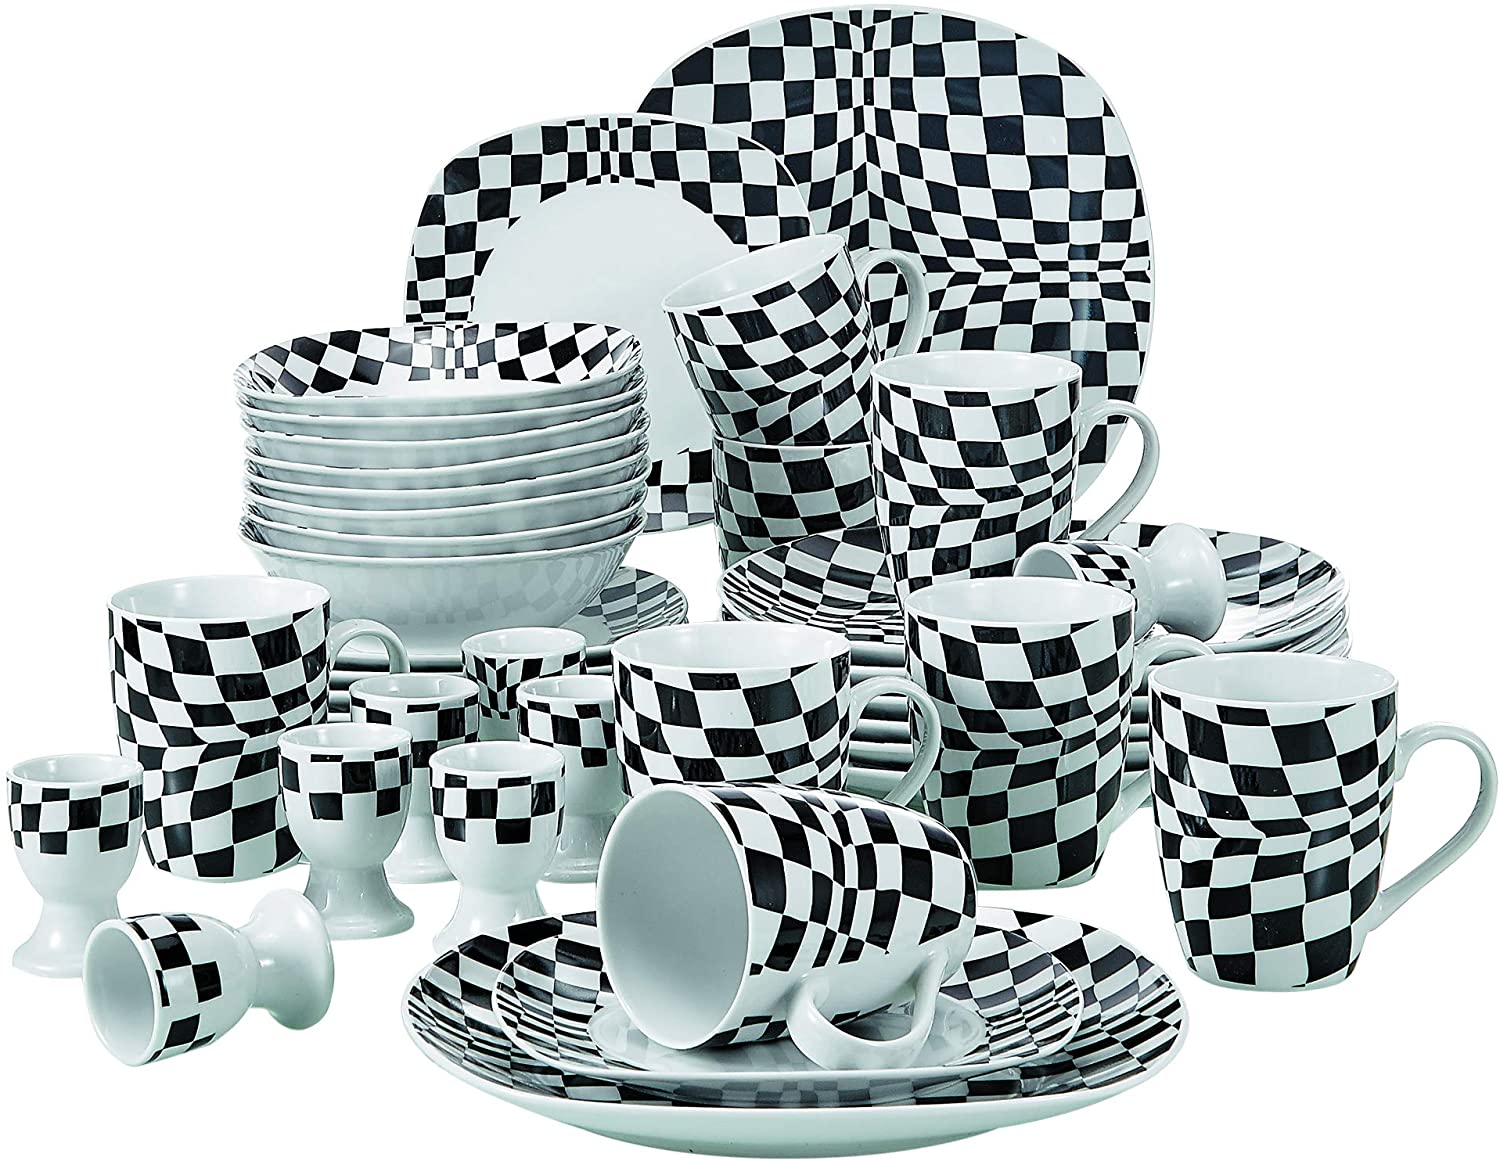 VEWEET \'Louise\' Porcelain Crockery Set 40 Pieces for 8 People Breakfast Service with 8 Egg Cups, Coffee Cups 350 ml, Cereal Bowls, Dessert Plates and Flat Plates